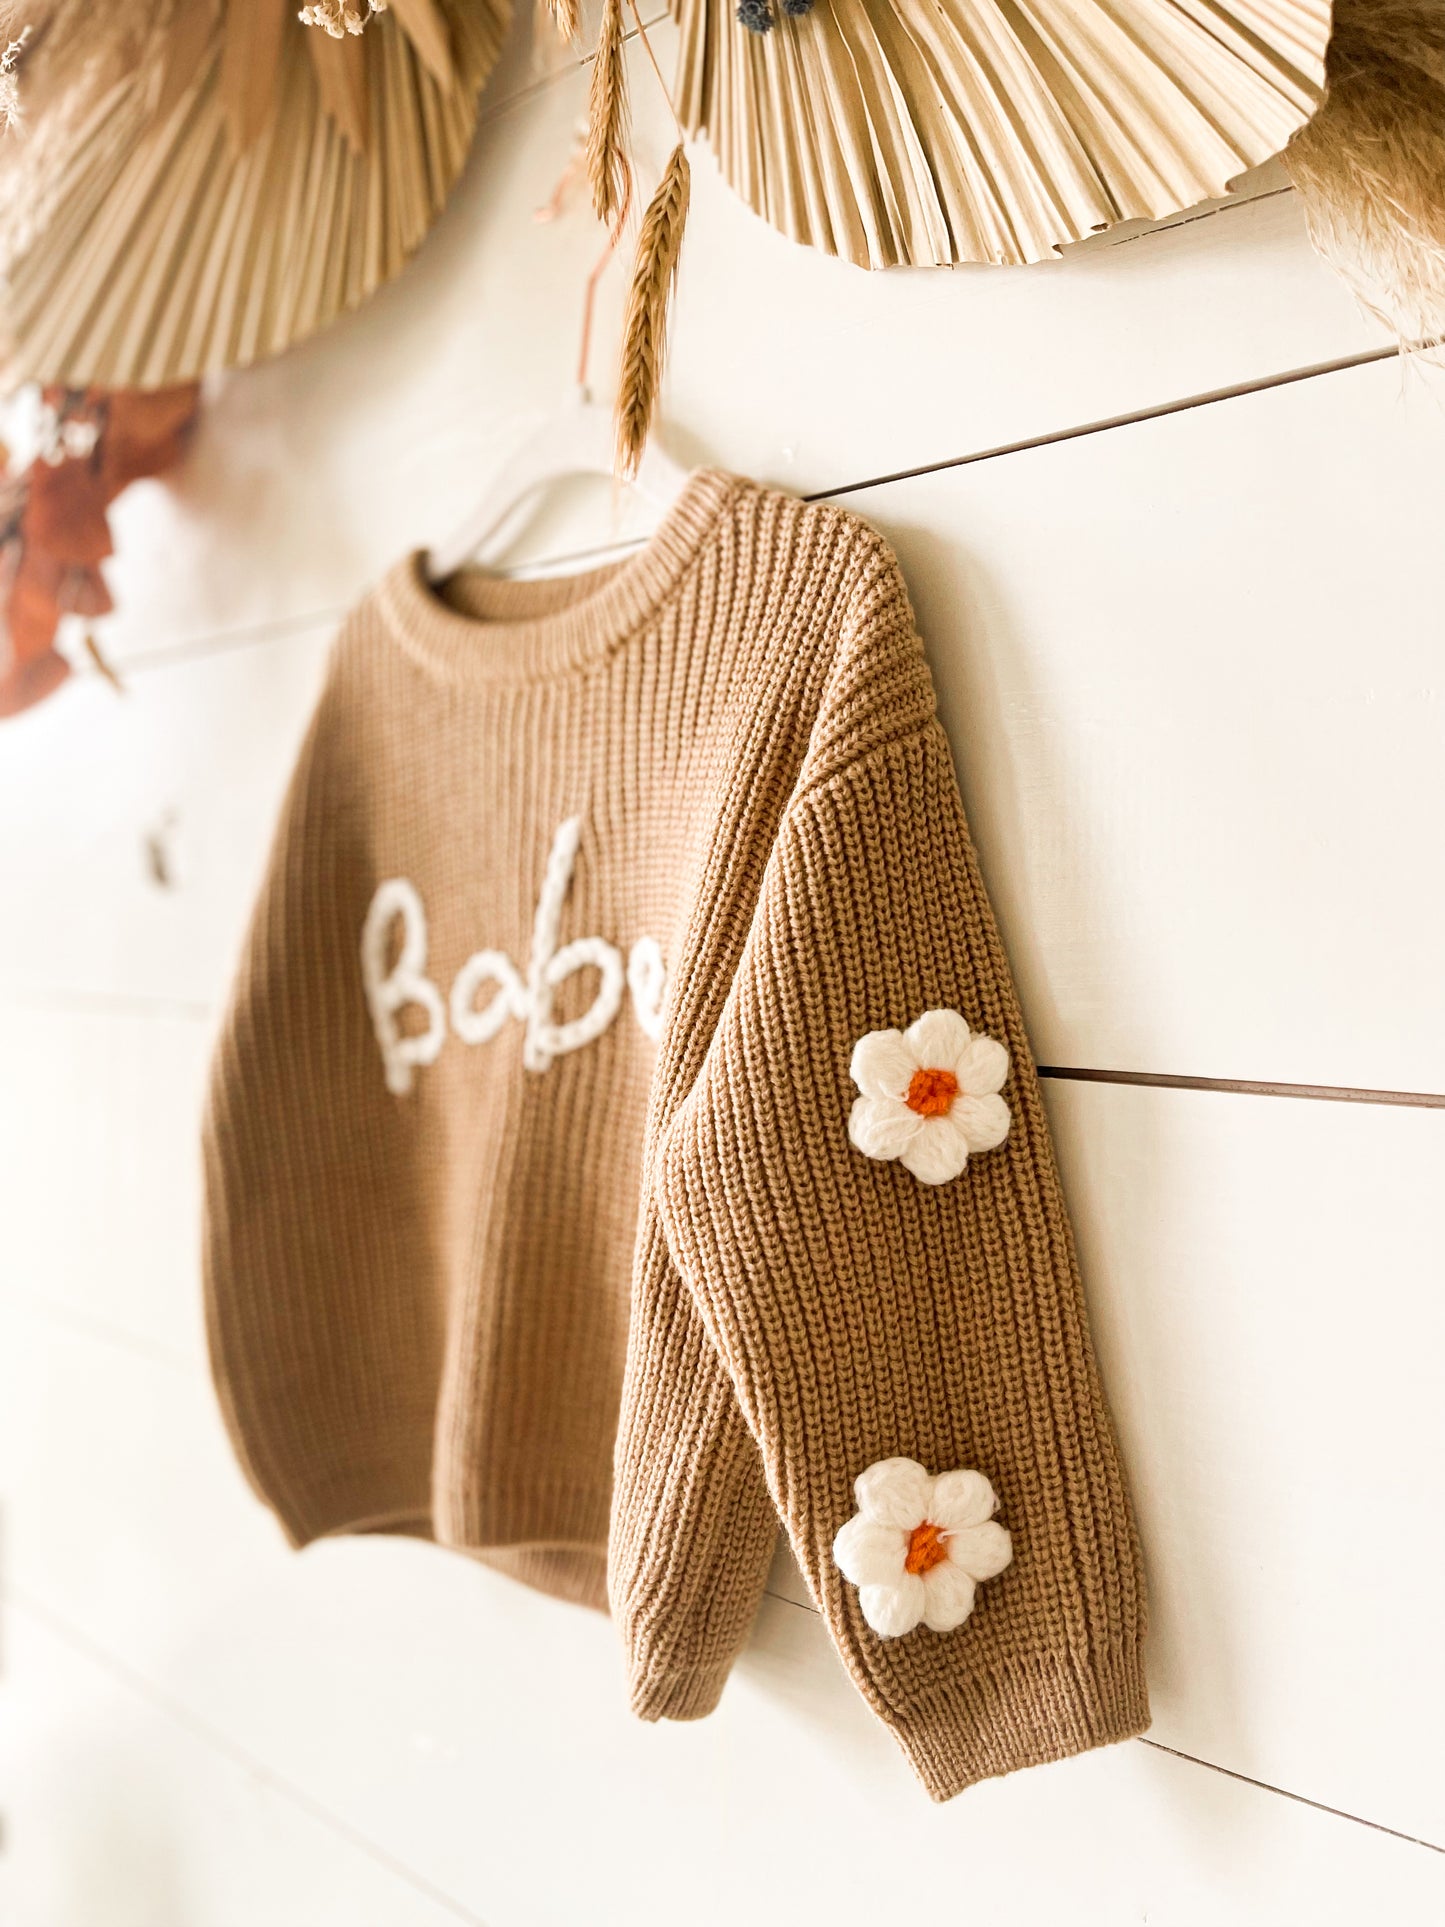 The Babe sweater